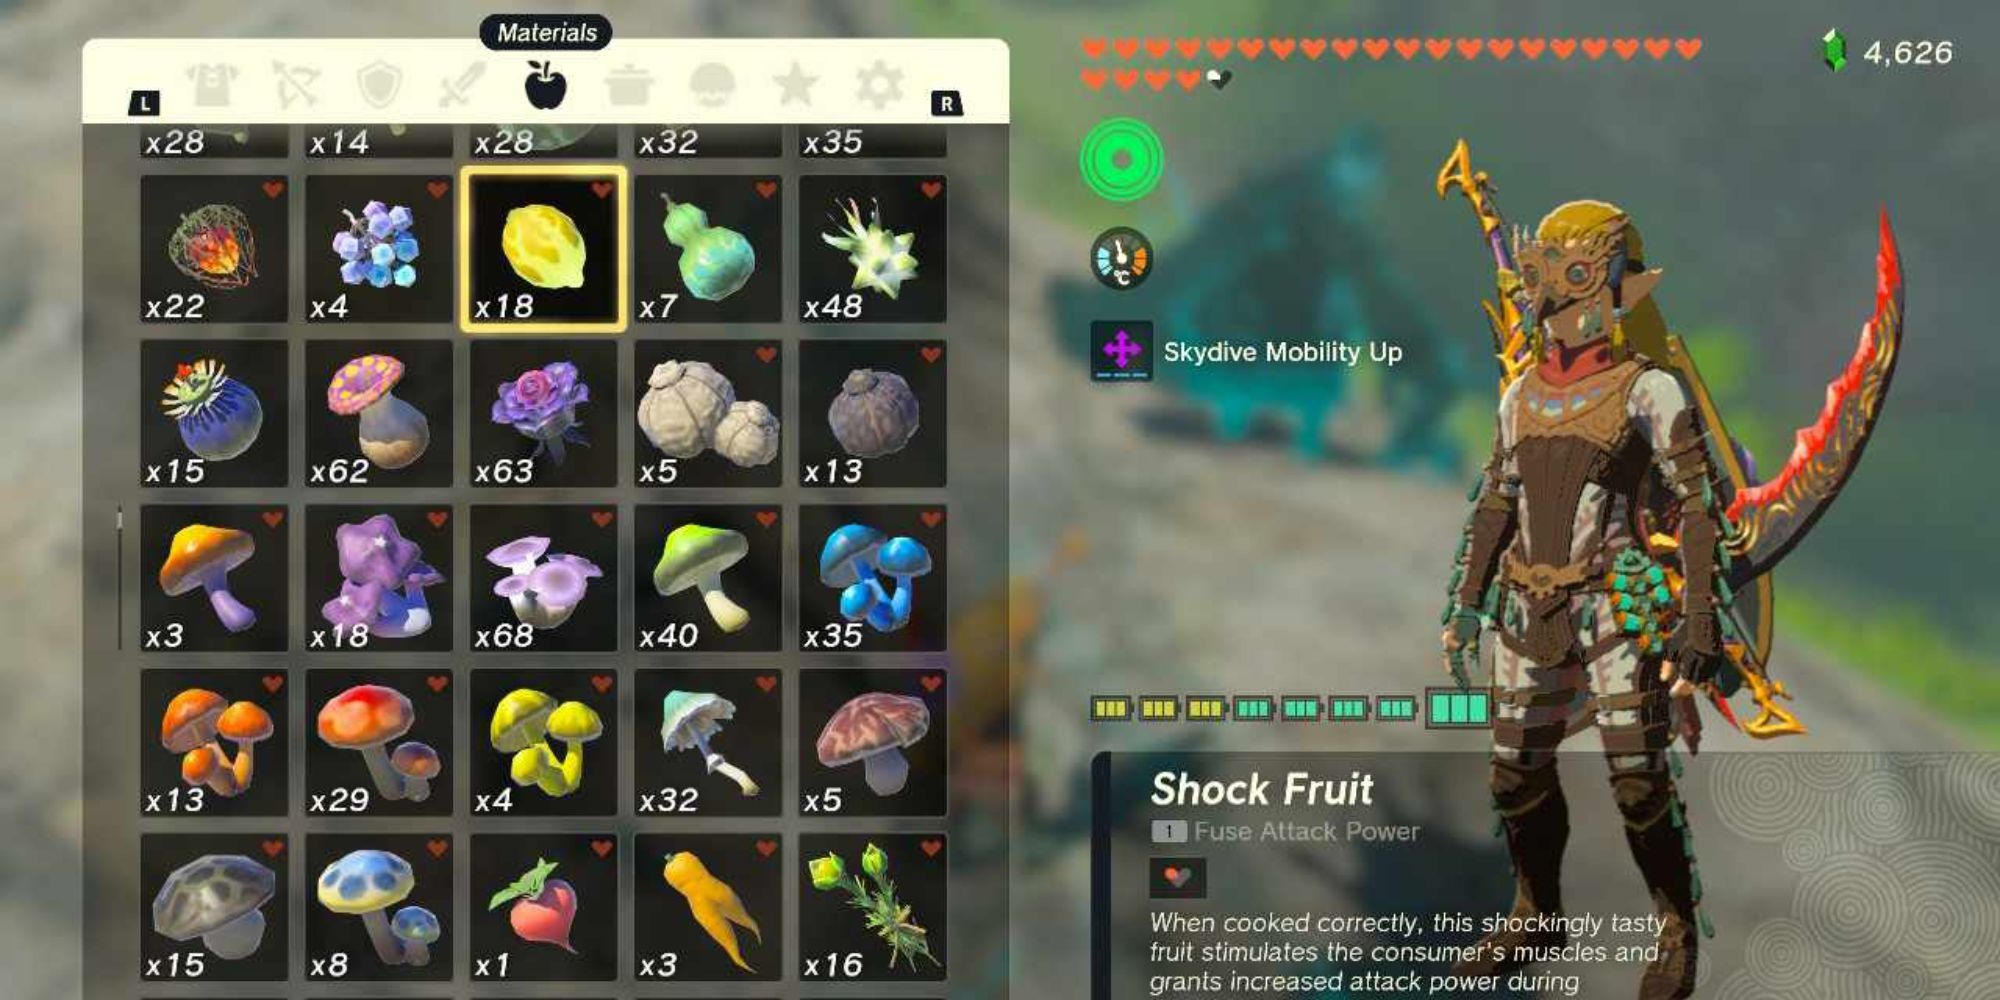 Link from Tears of the Kingdom stood beside his inventory, which is showing a Shock Fruit